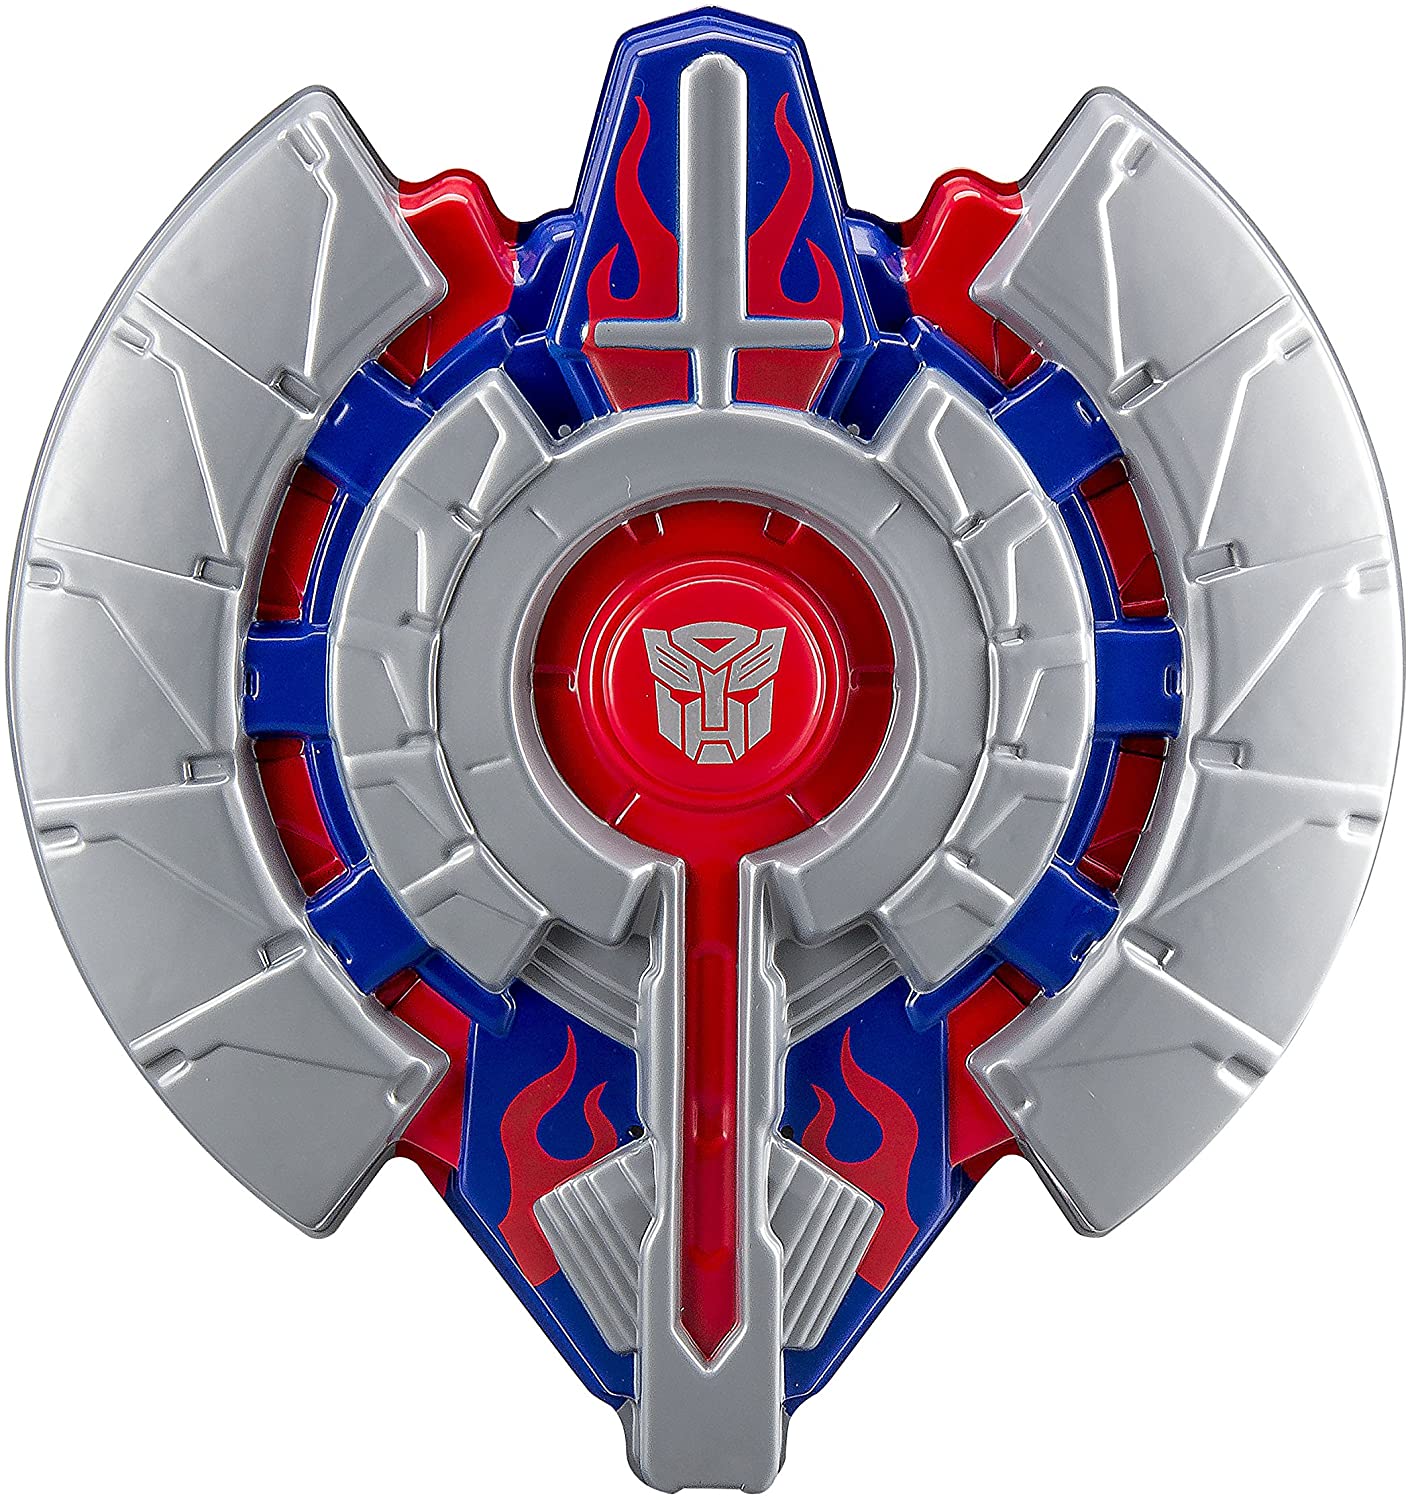 Transformers TF502PR Optimus Prime Toy Sword and Shield